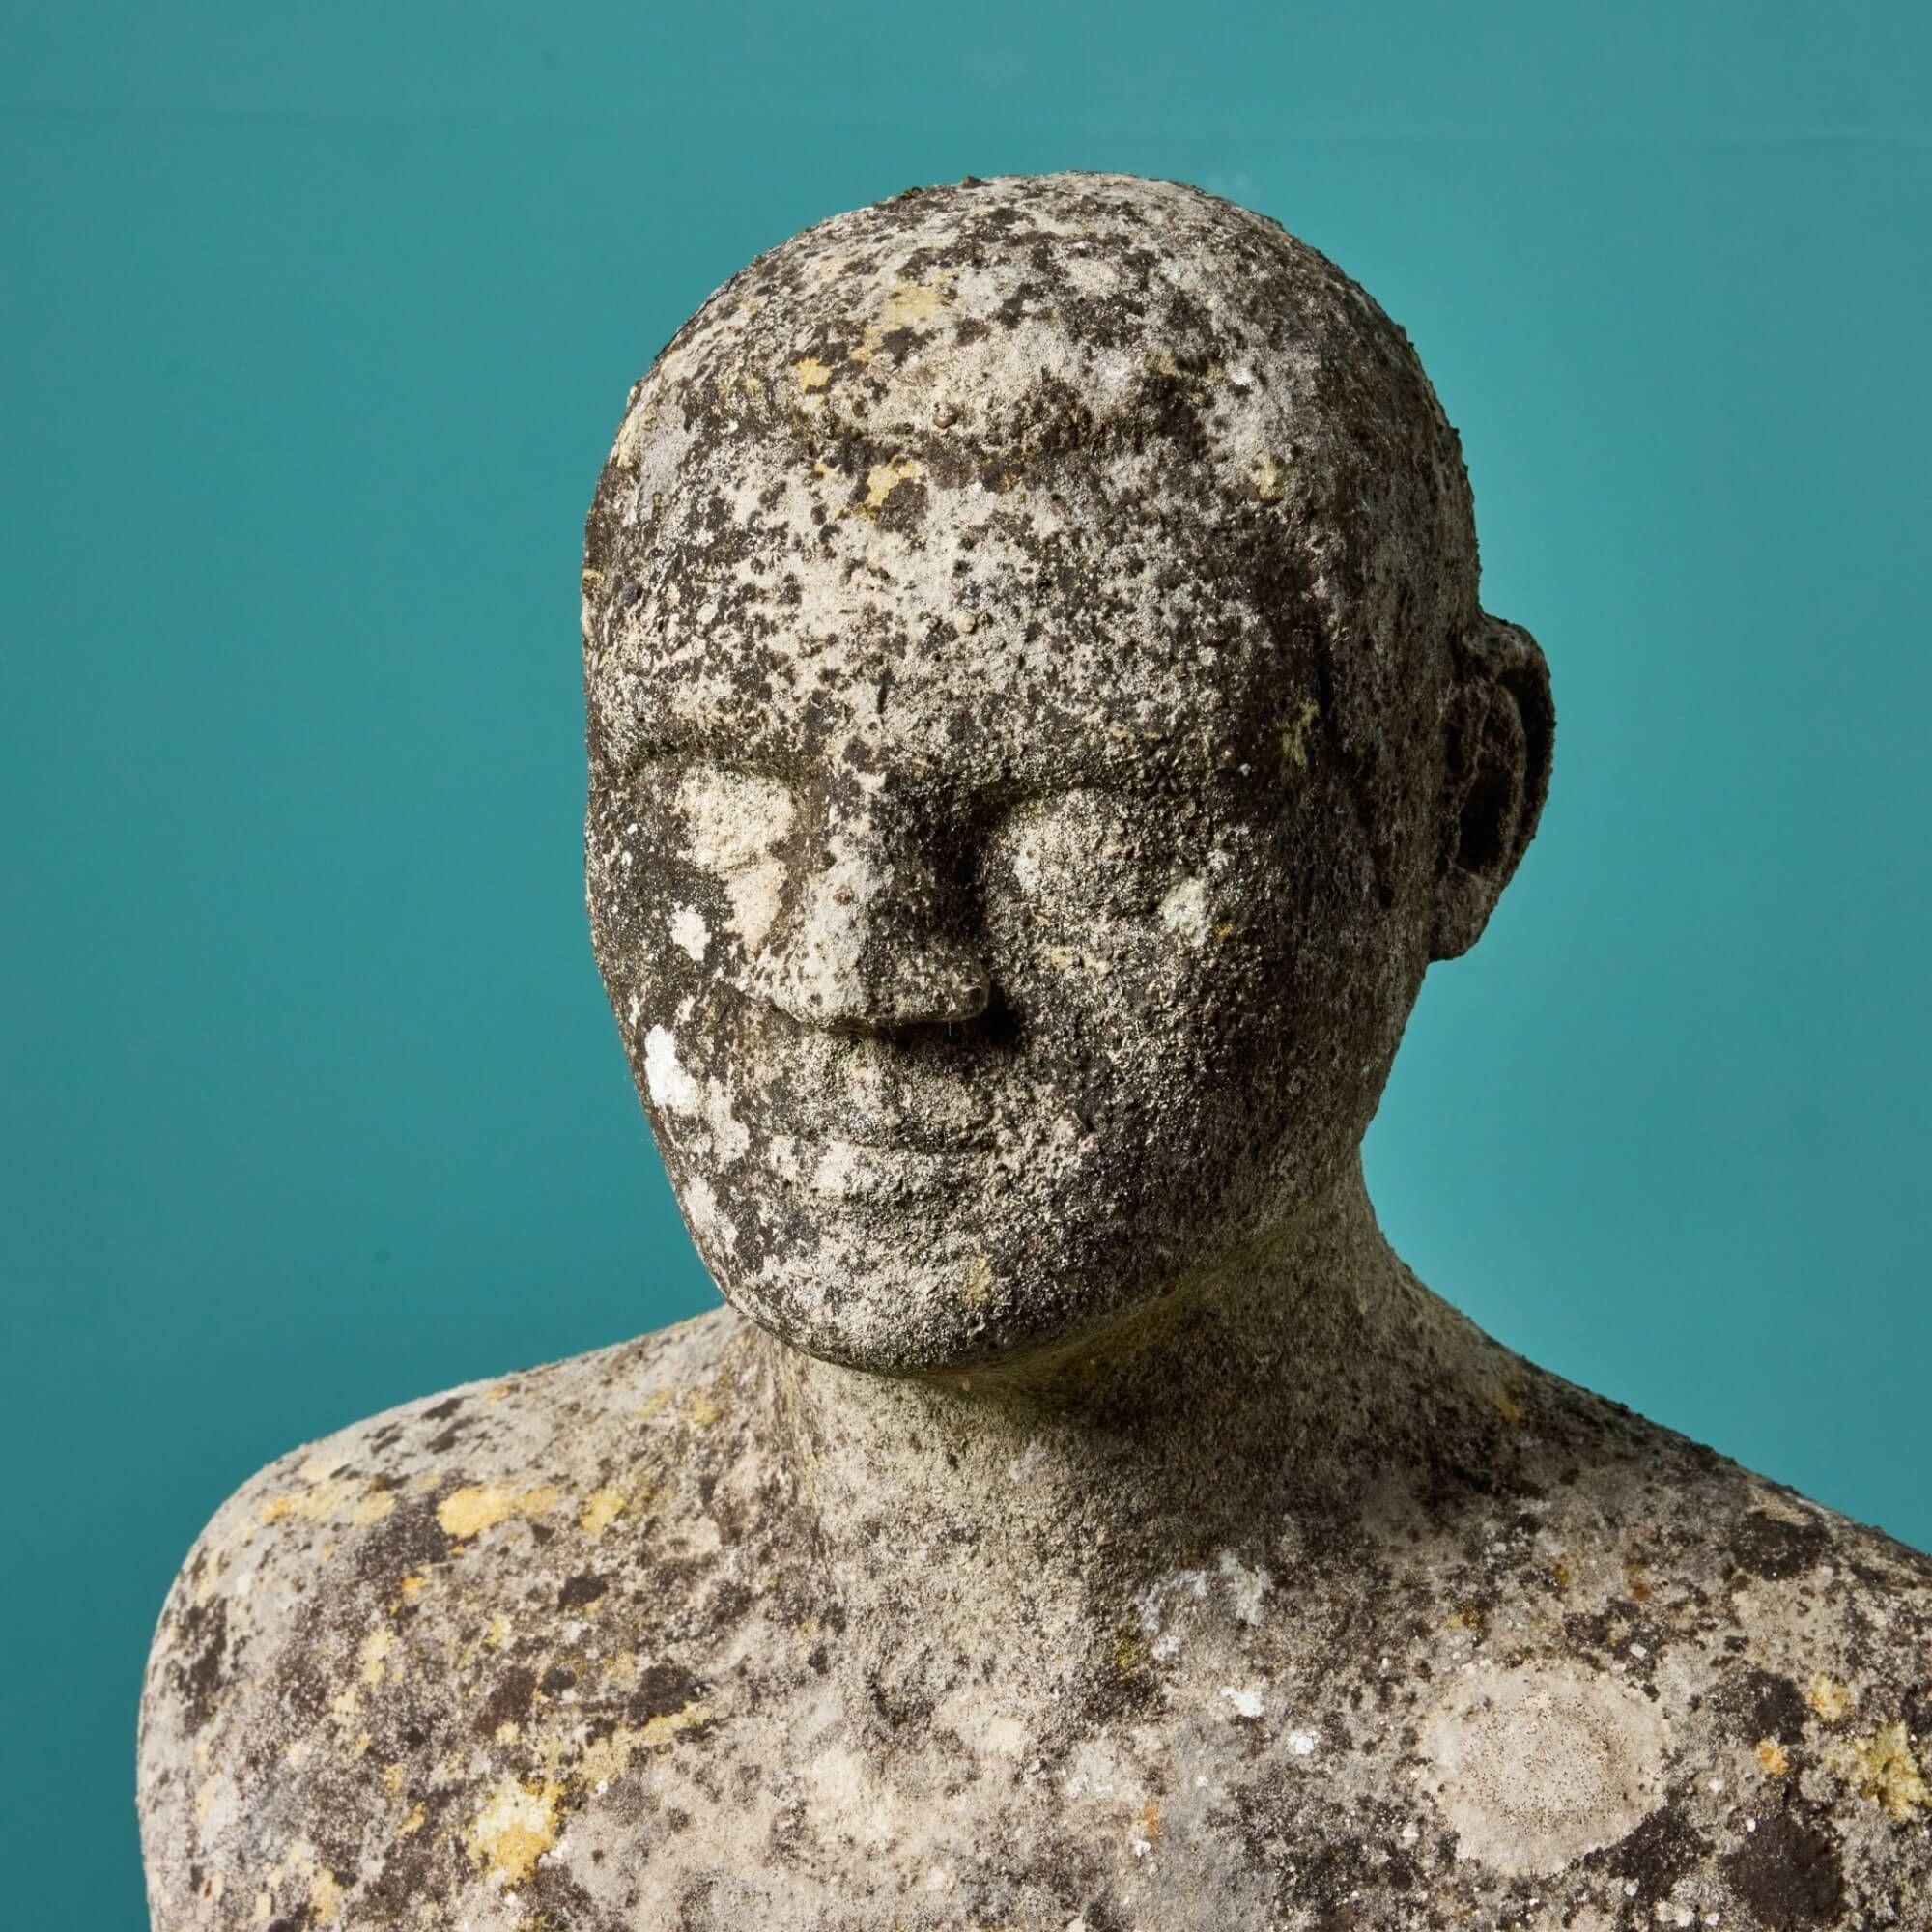 Mid-Century Modern Stone Bust Sculpture by a Student of Sir Hugh Casson For Sale